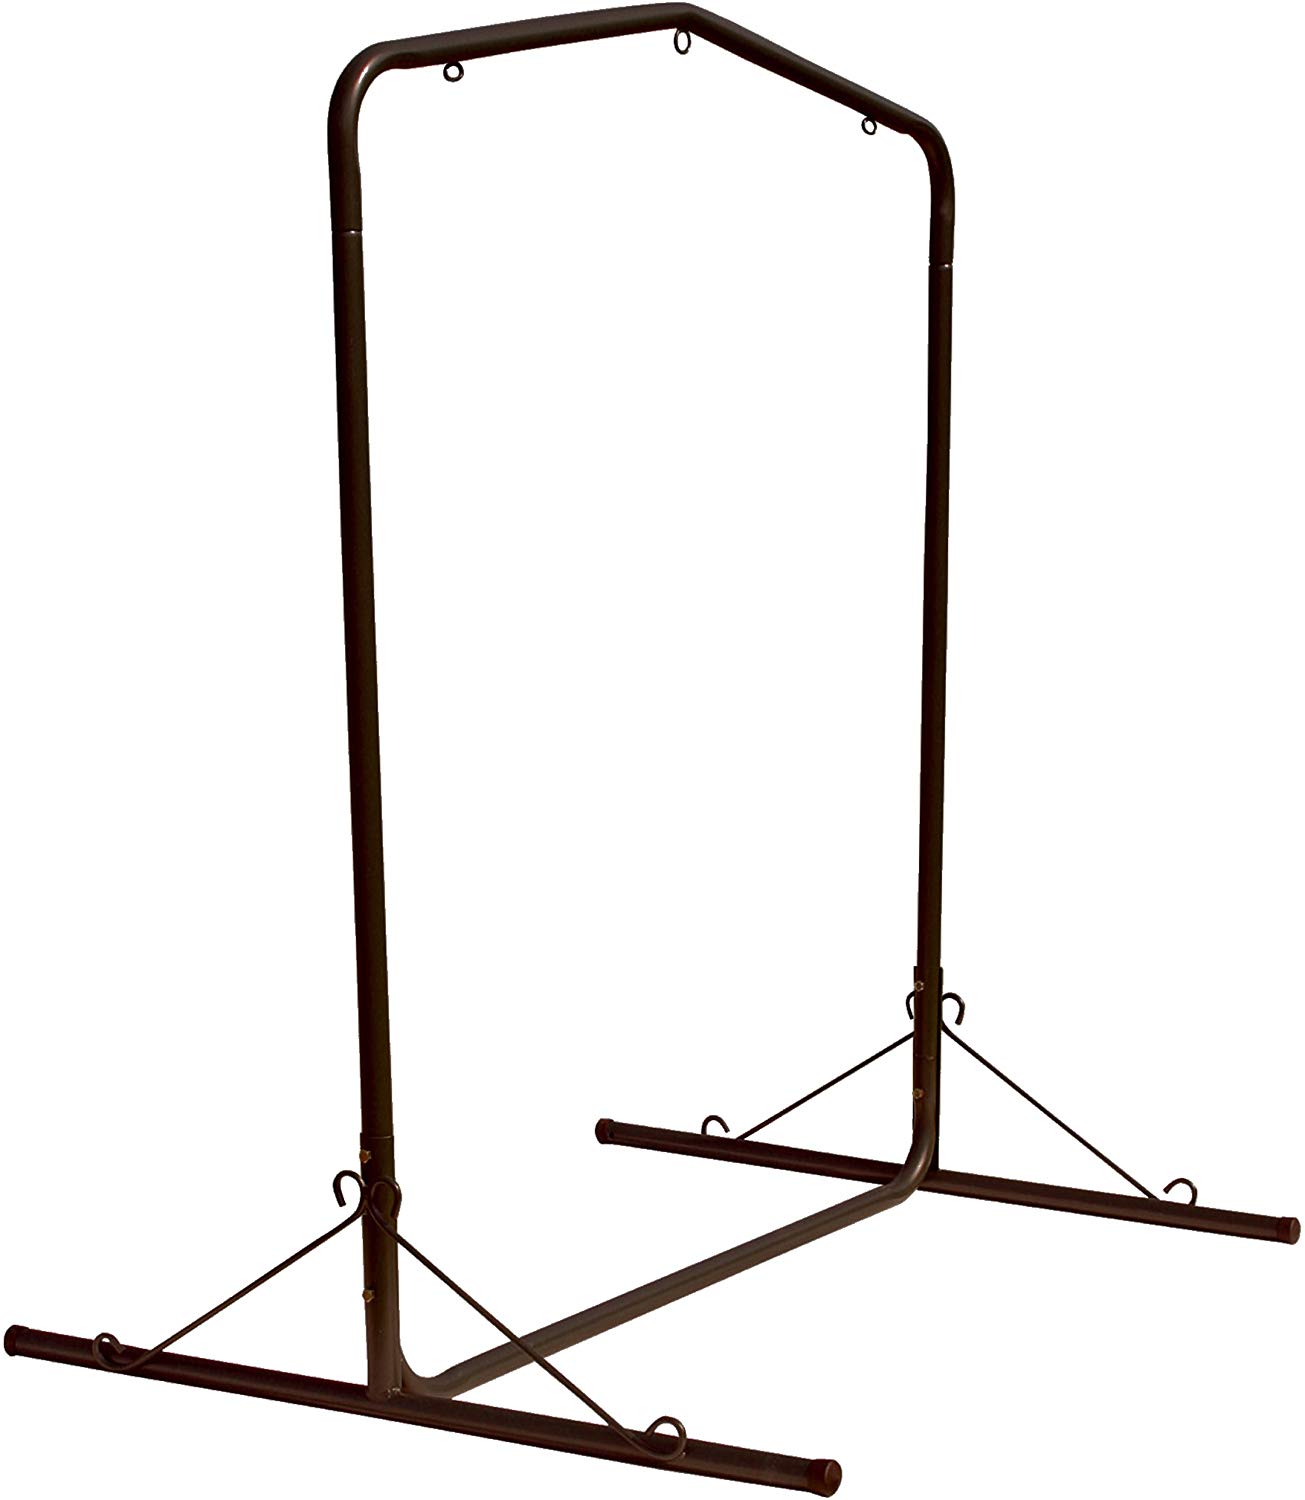 T-base-metal-sturdy-metal-swing-stand-made-in-usa